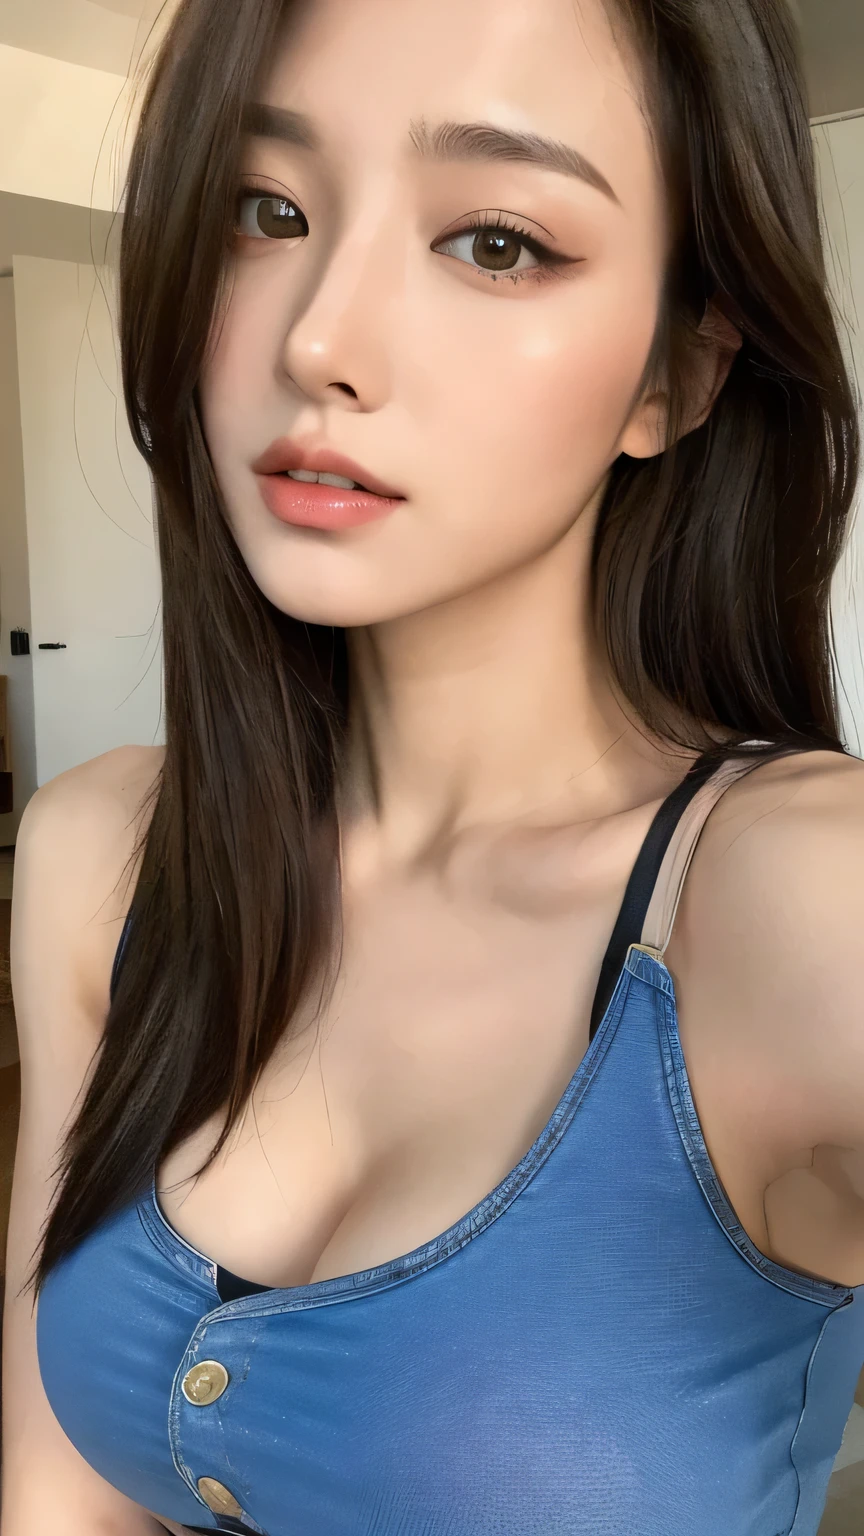 （lifelike， high - resolution：1.3）， 1 girl with a perfect body， Super fine face and eyes，slong hair， Tank top of random colors：1.2， short jeans， big boob，Expose cleavage,  muscular body,  (Muscular:1.5),